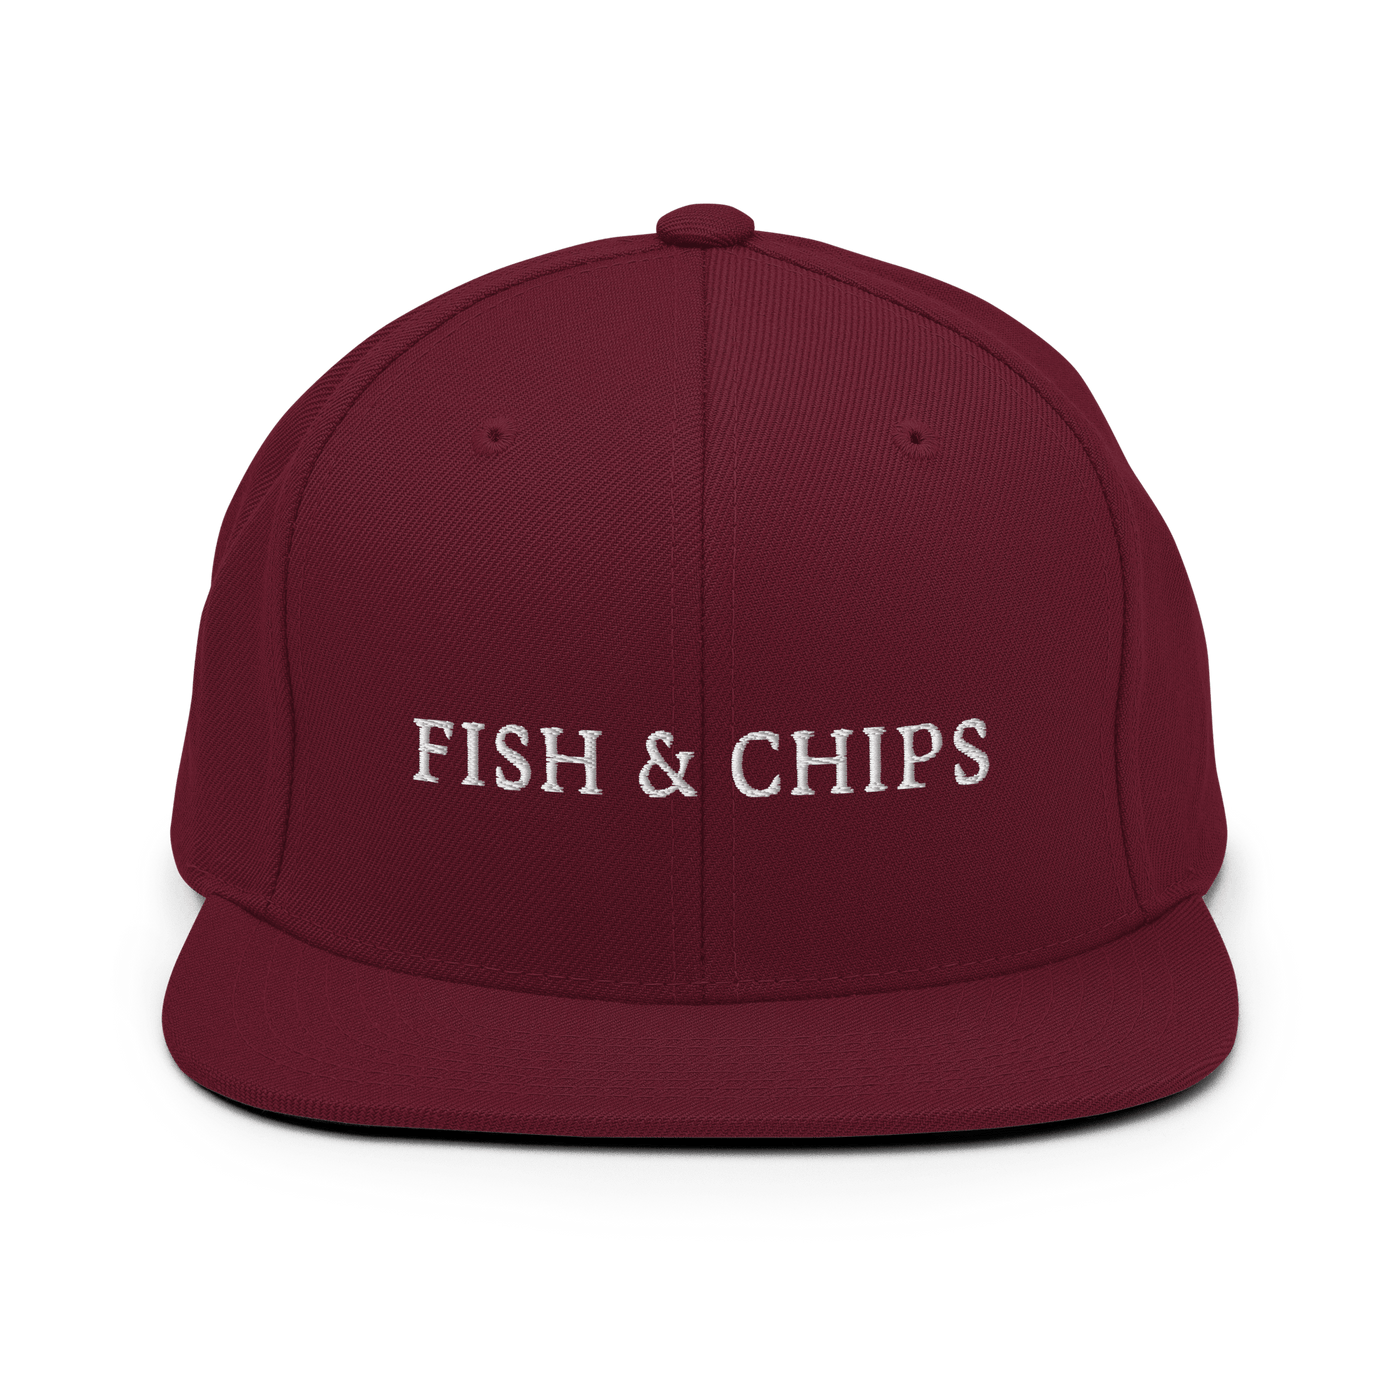 Fish & Chips Snapback Hat – Just Another Cap Store